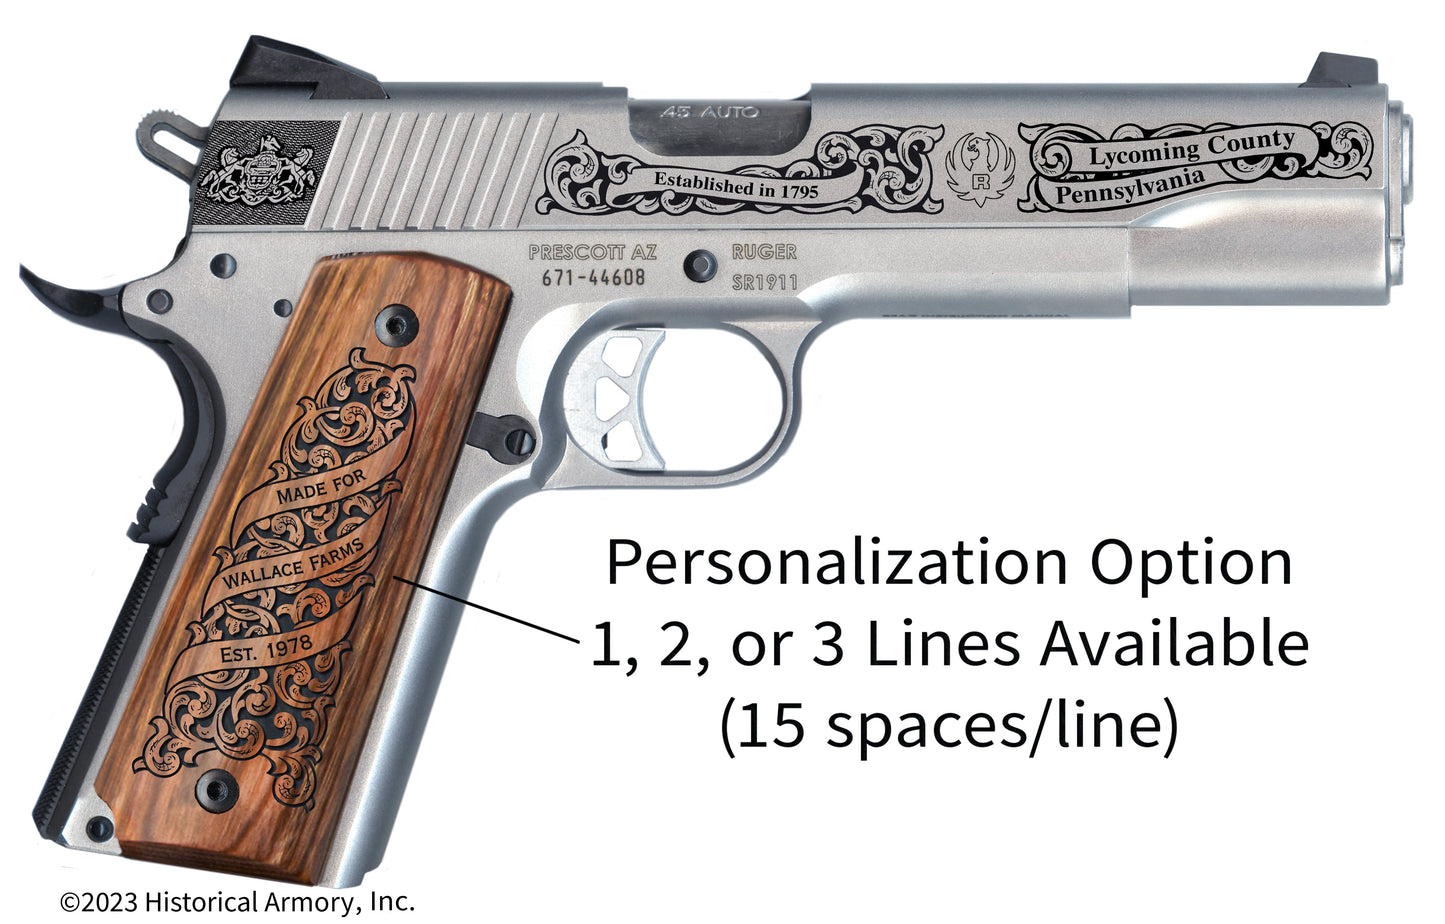 Lycoming County Pennsylvania Personalized Engraved .45 Auto Ruger 1911